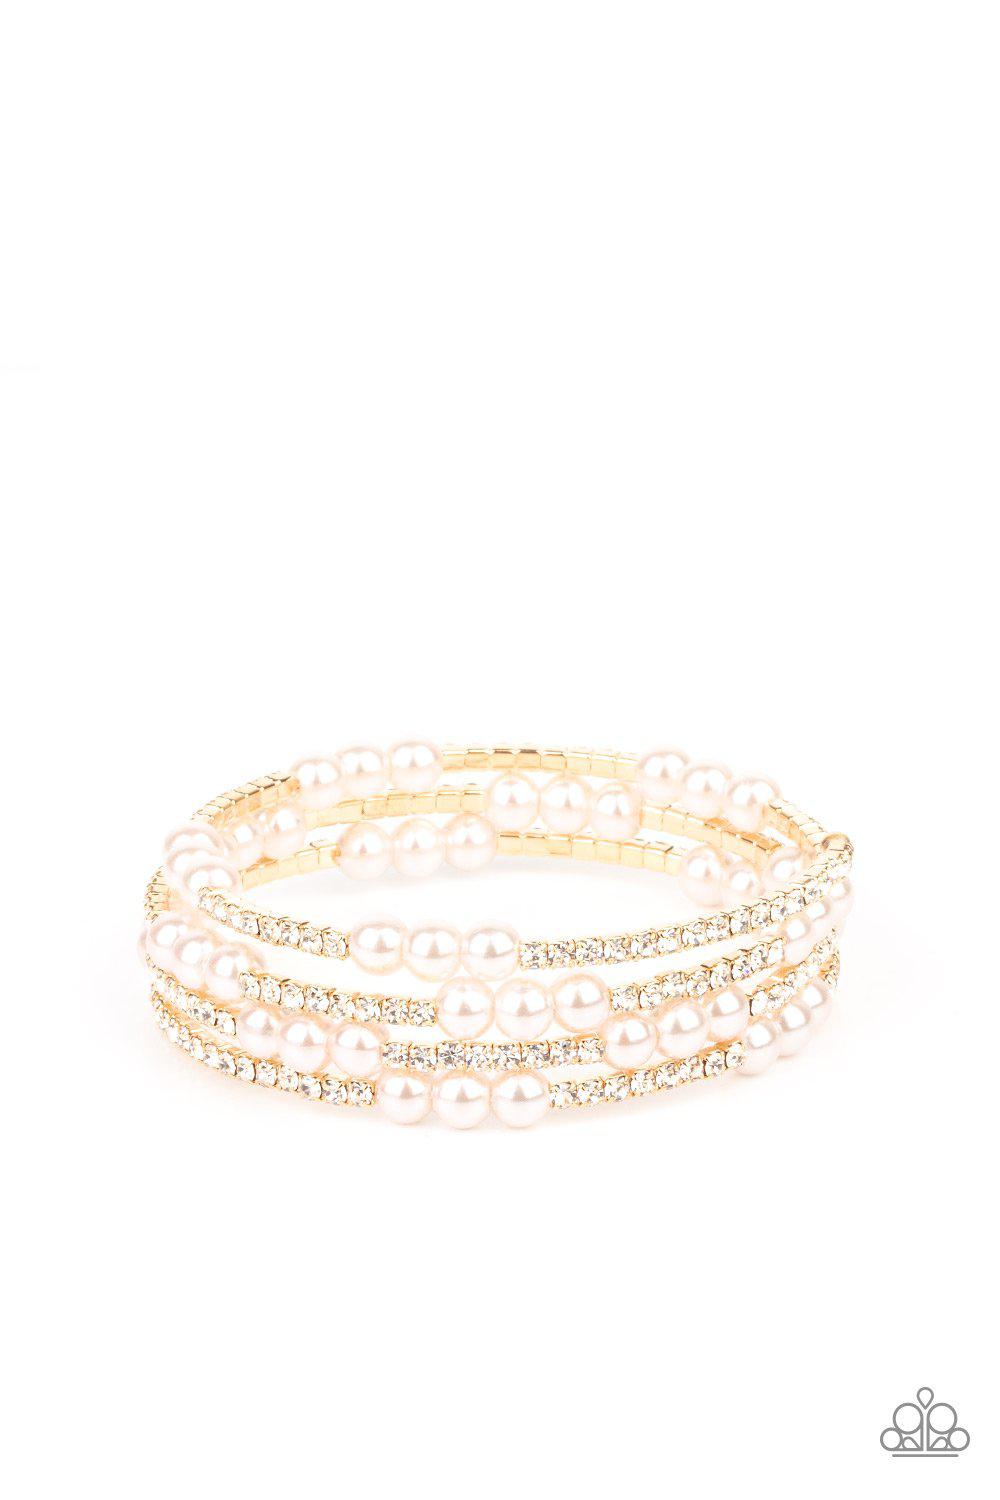 Hollywood Hospitality Gold, White Rhinestone and Pearl Infinity Wrap Bracelet - Paparazzi Accessories - lightbox -CarasShop.com - $5 Jewelry by Cara Jewels